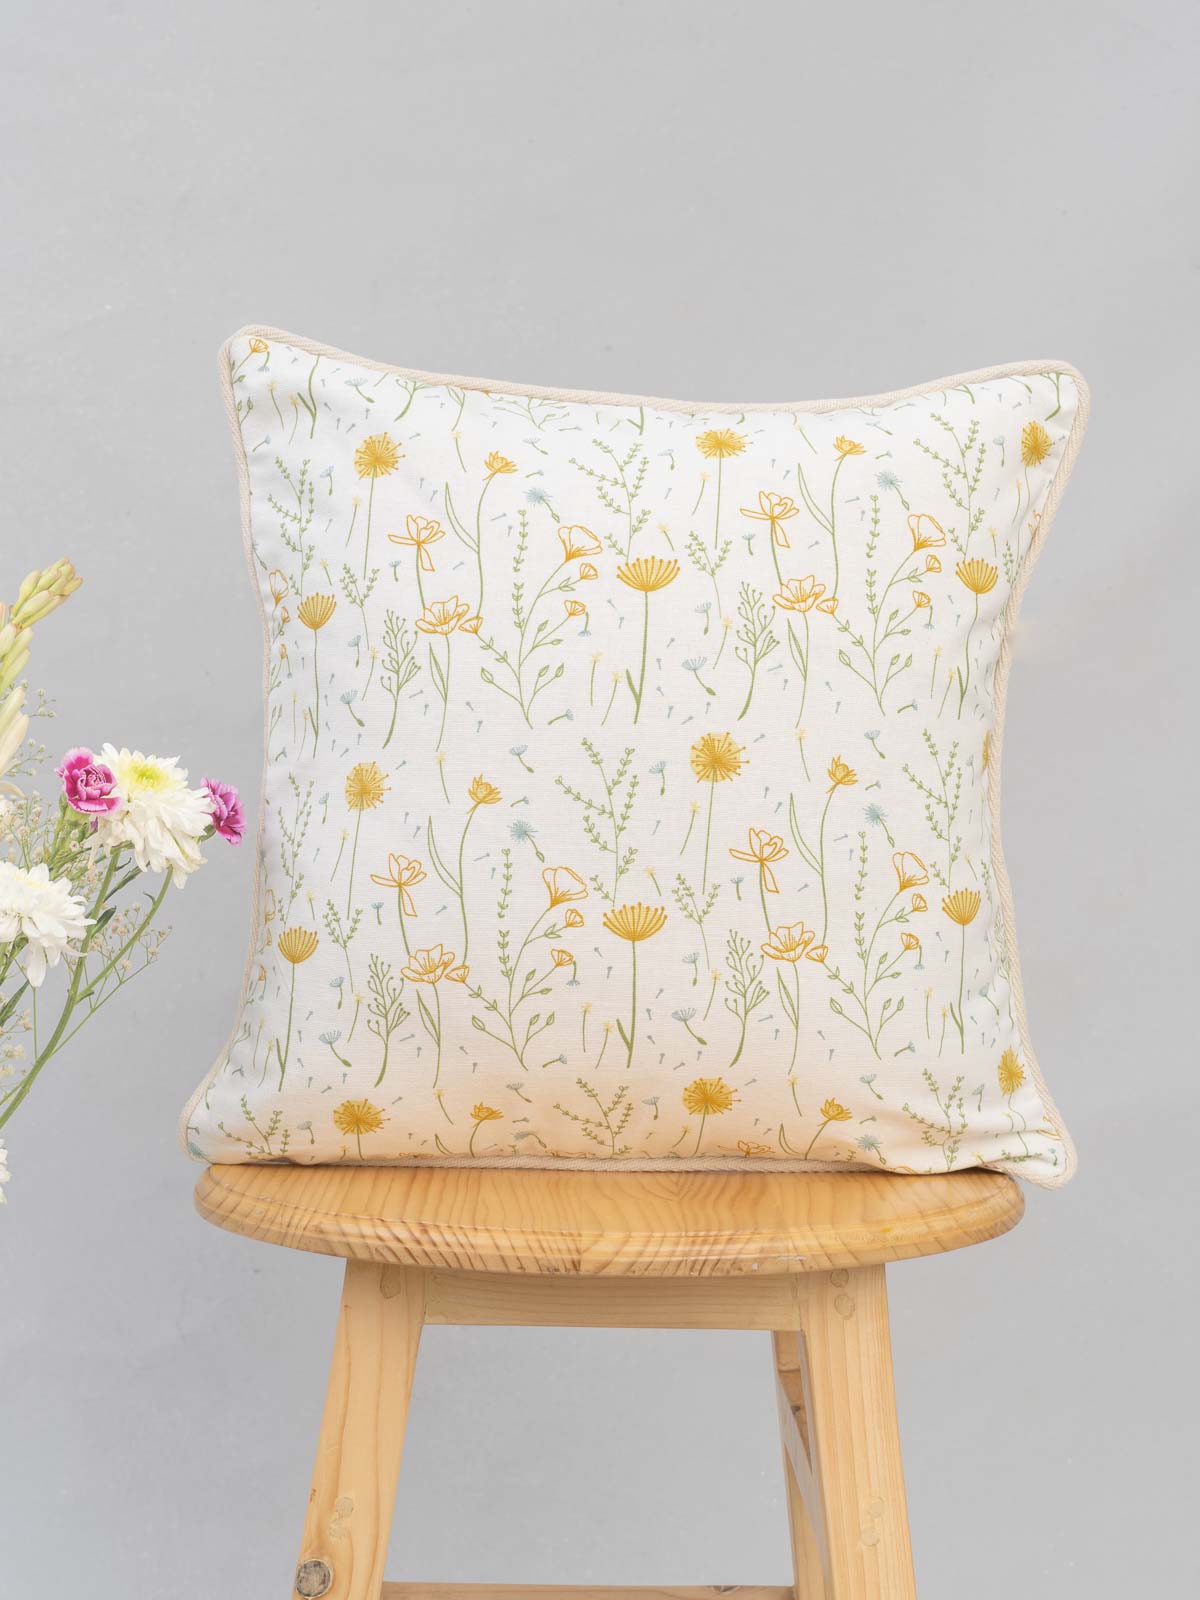 Drifting dandelion 100% cotton customisable floral cushion cover for sofa - Yellow